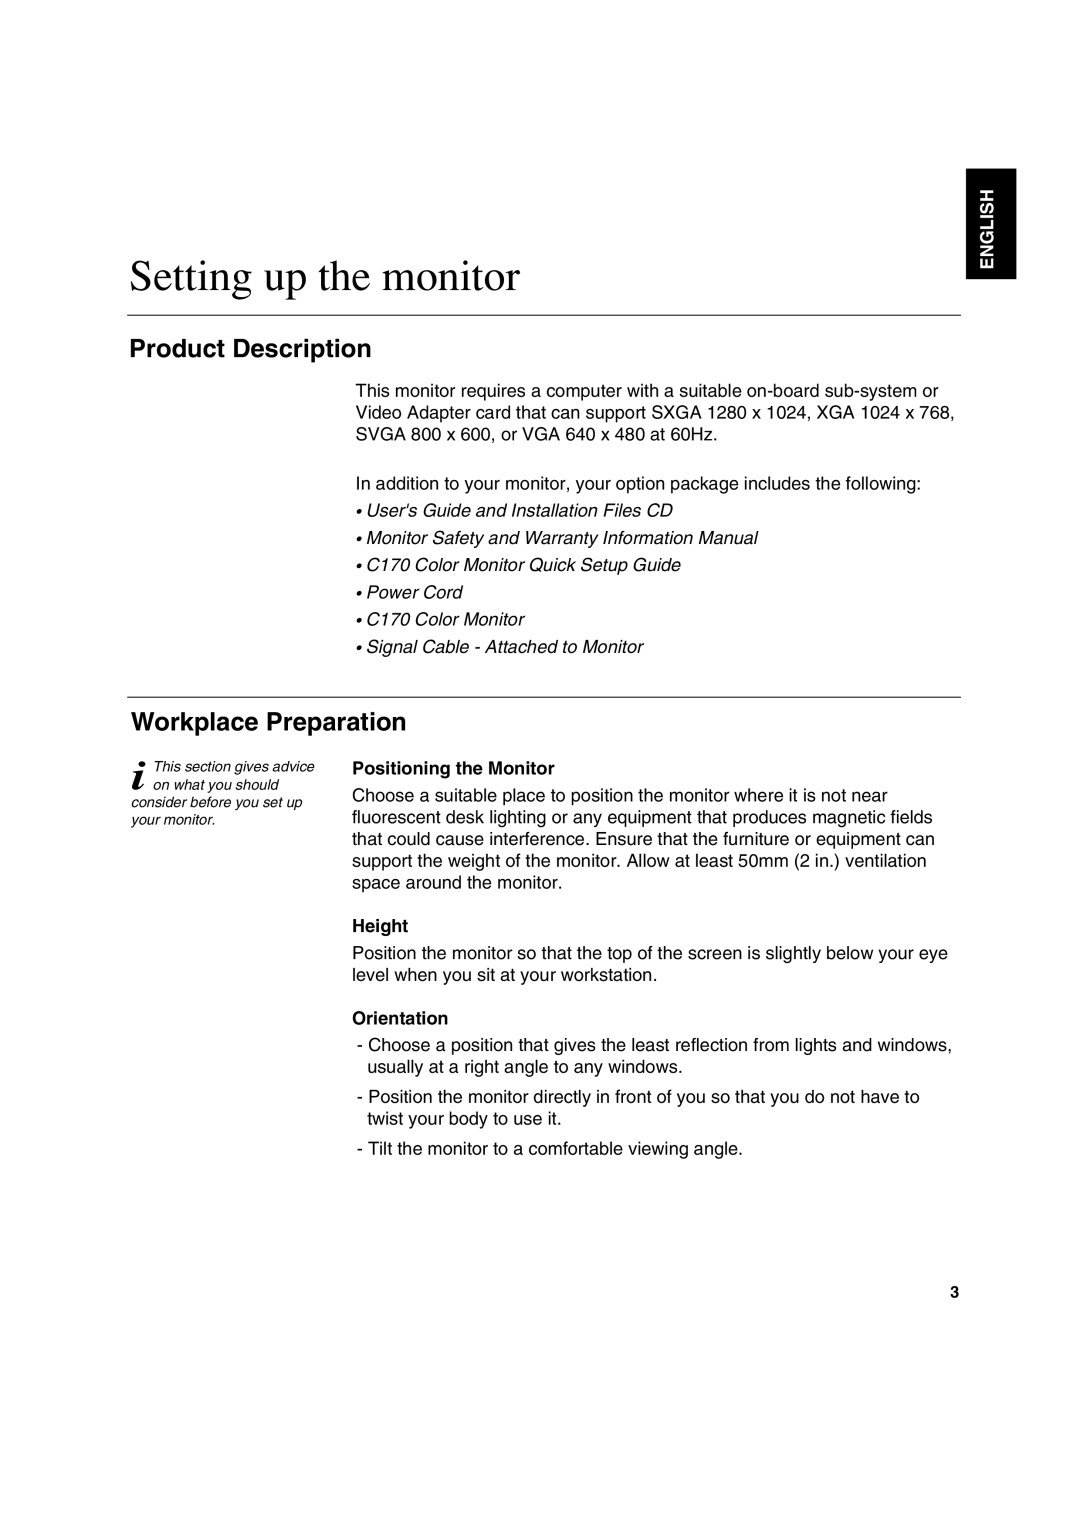 IBM C170 Setting up the monitor, Product Description, Workplace Preparation, Users Guide and Installation Files CD, Height 